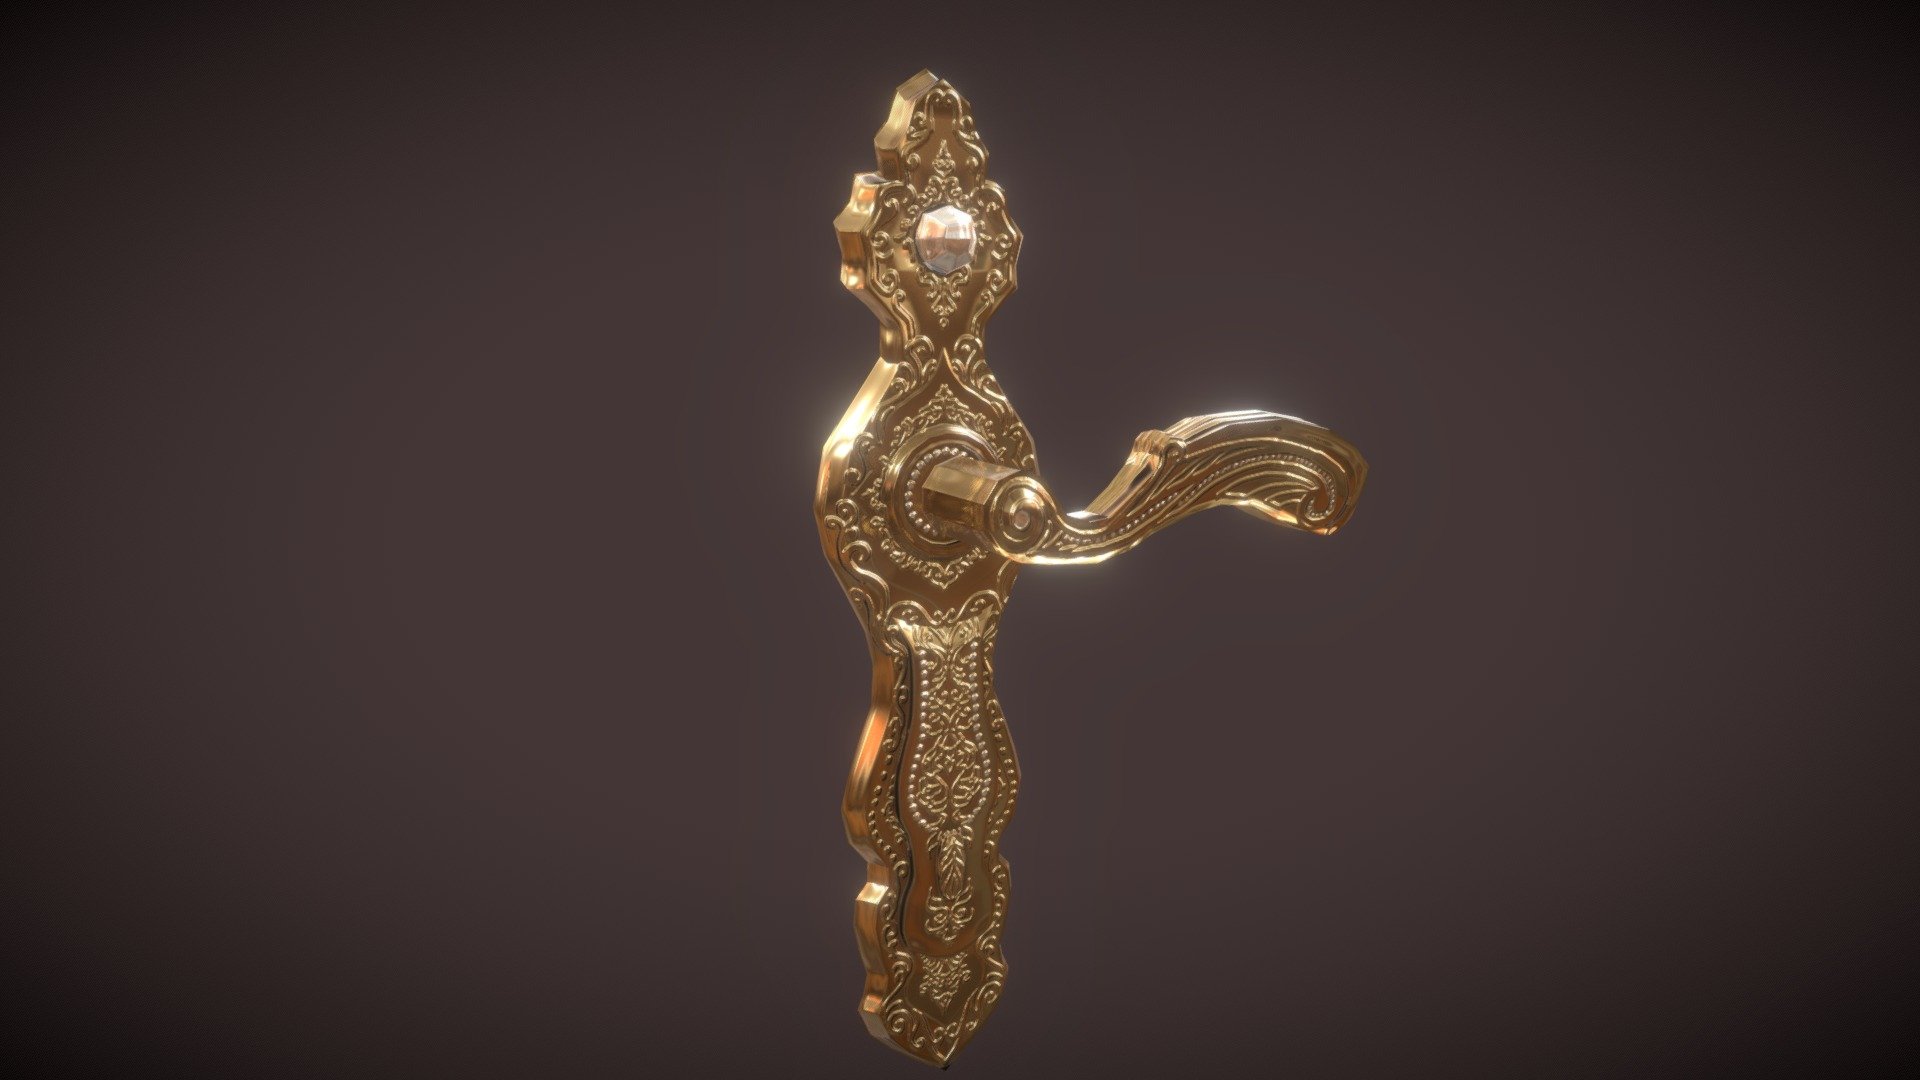 This is a bait, look at my other work pleaseeeee &lt;3
.
Or else 
....
Thank you &lt;3 - Low-Poly Fancy Doorhandle - Download Free 3D model by thiezubu 3d model